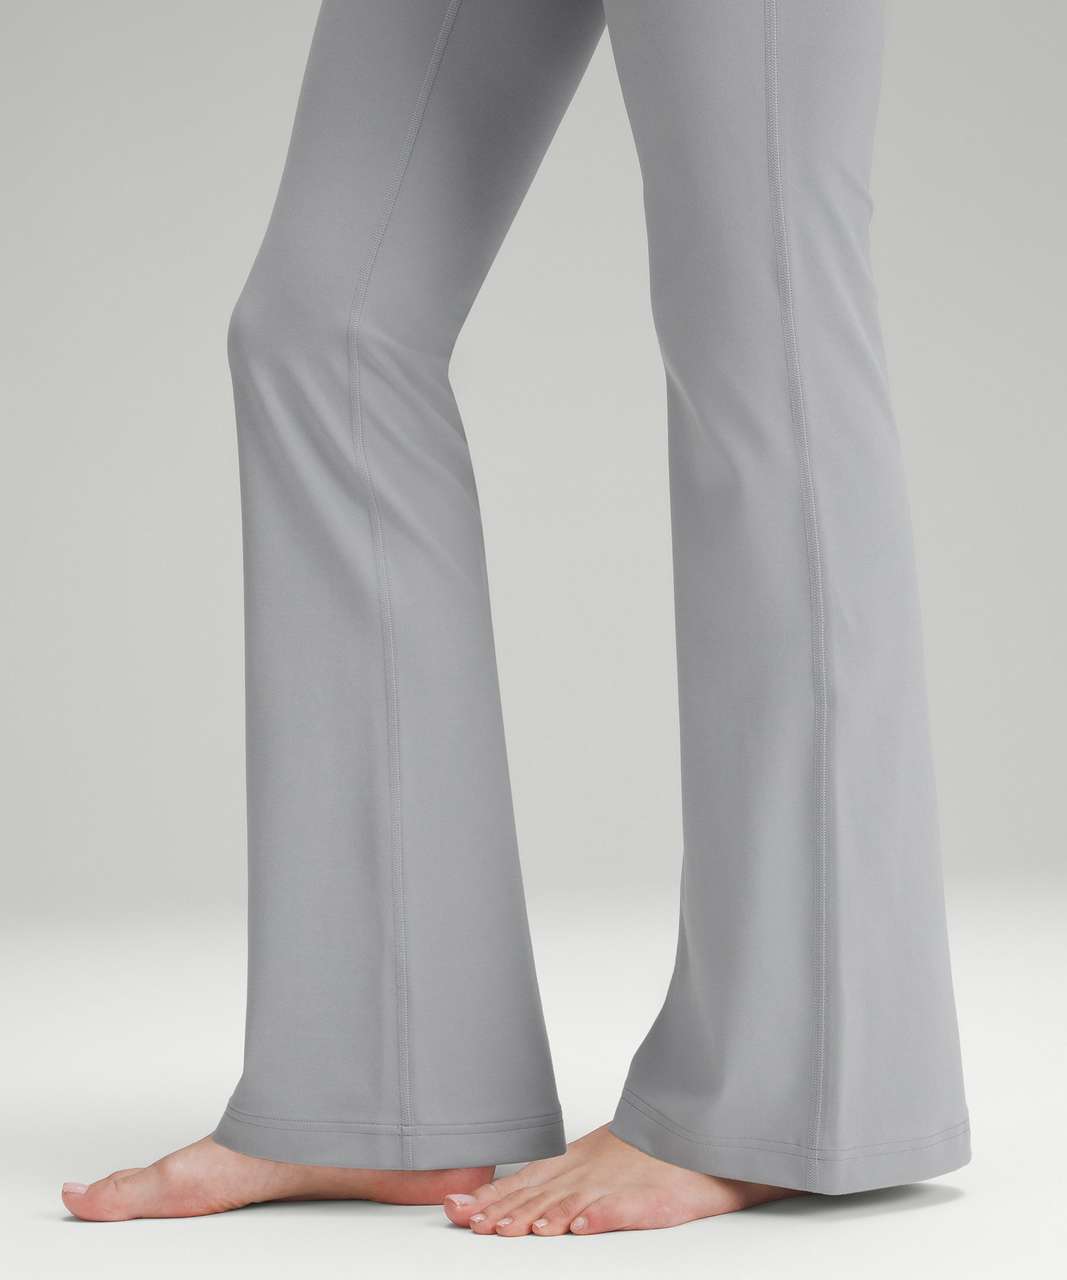 Lululemon Groove Pants - size 8 regular for sale in North Saanich